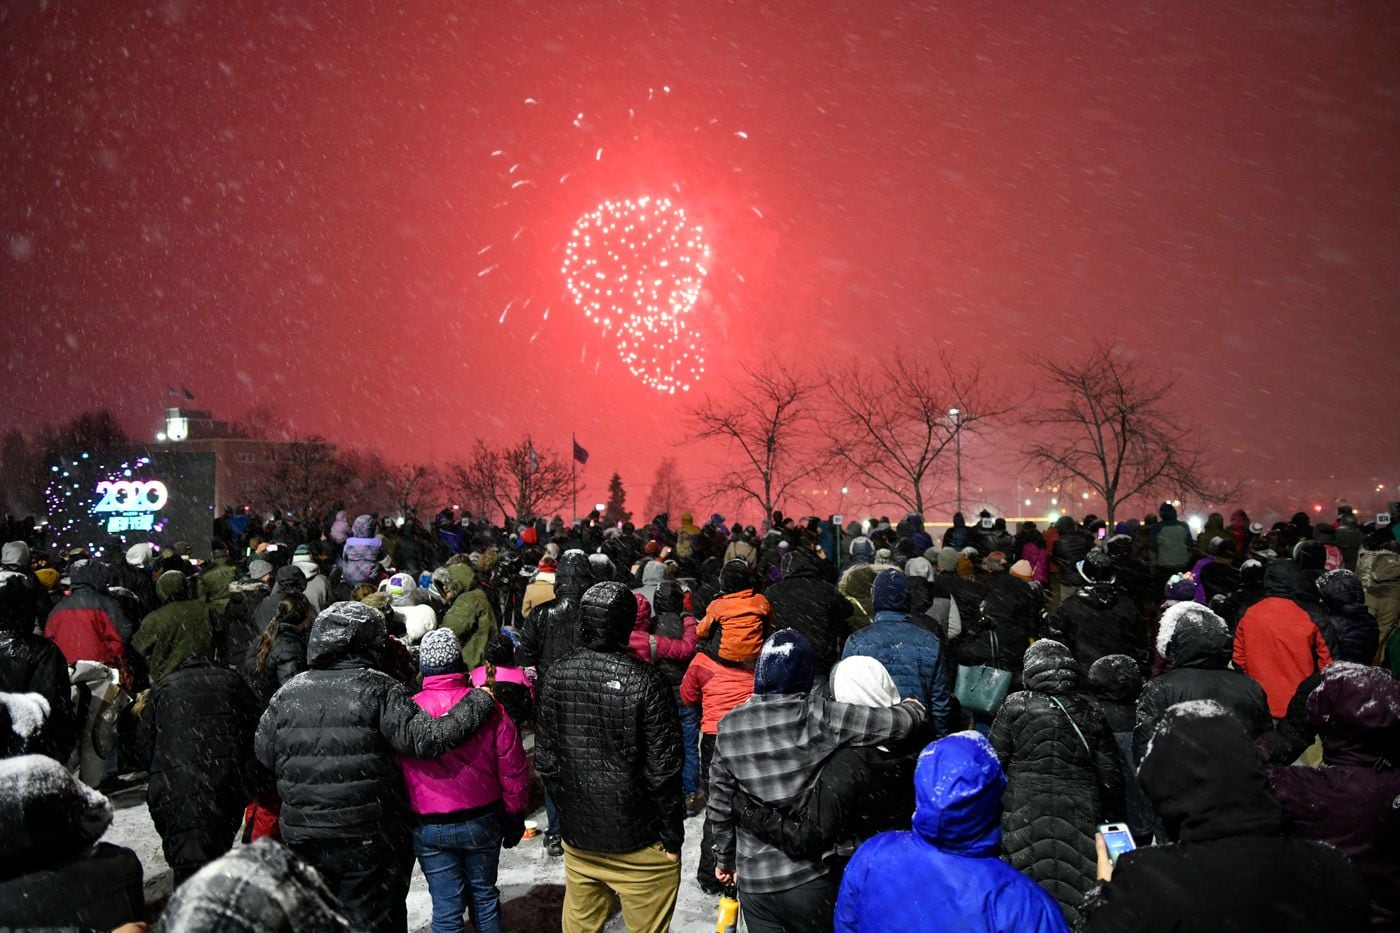 Snow falls and fireworks fly as Anchorage celebrates the start of a new